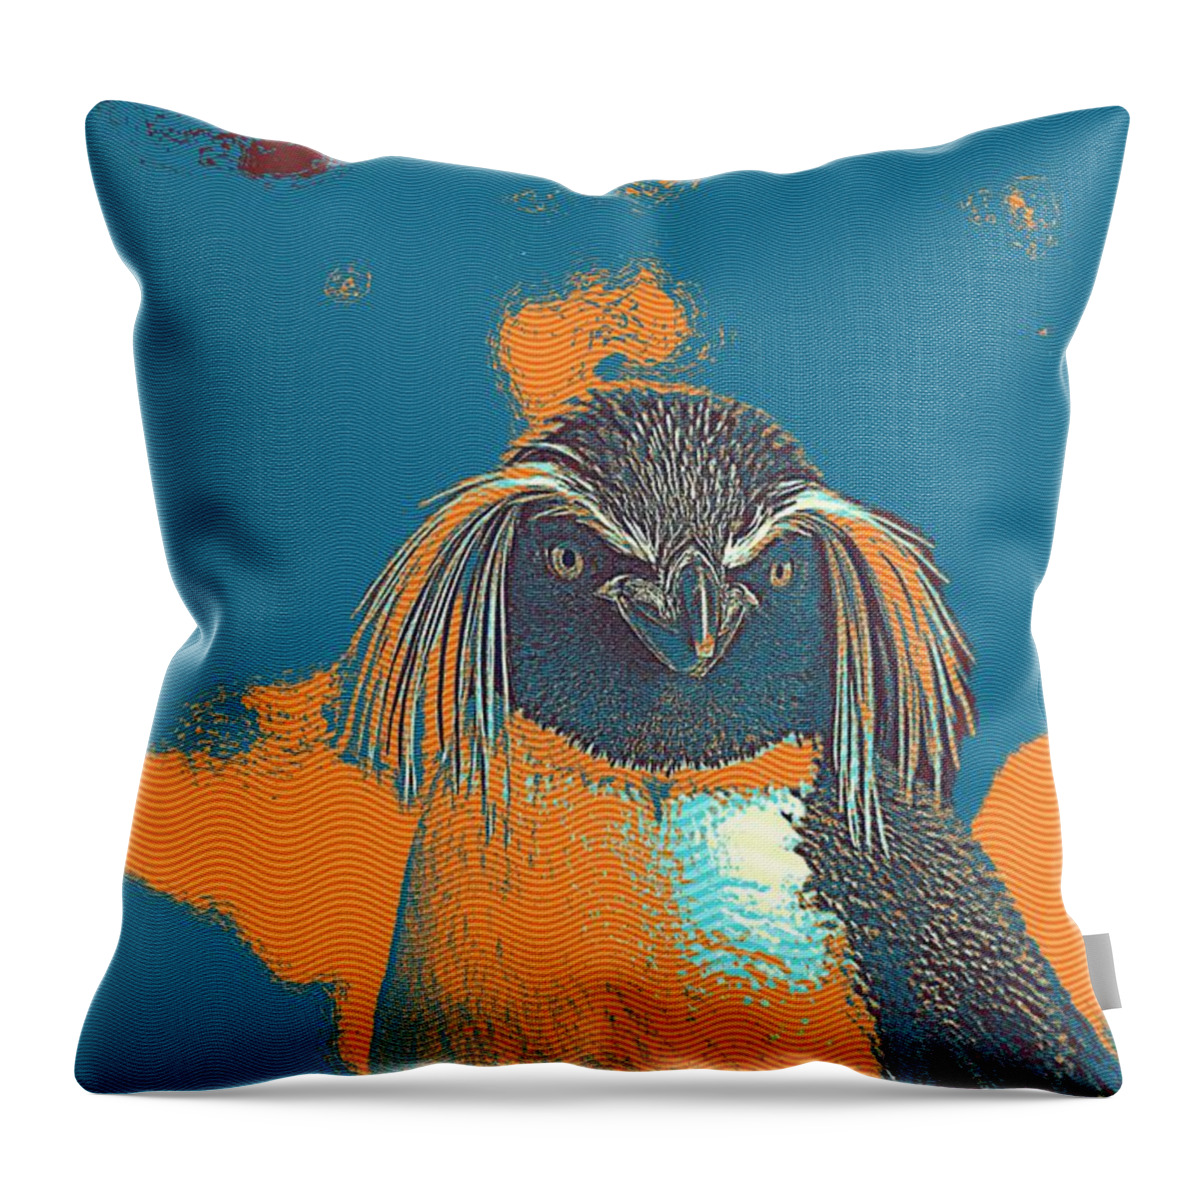 Penguin Throw Pillow featuring the painting Penguin Rockhopper by Celestial Images